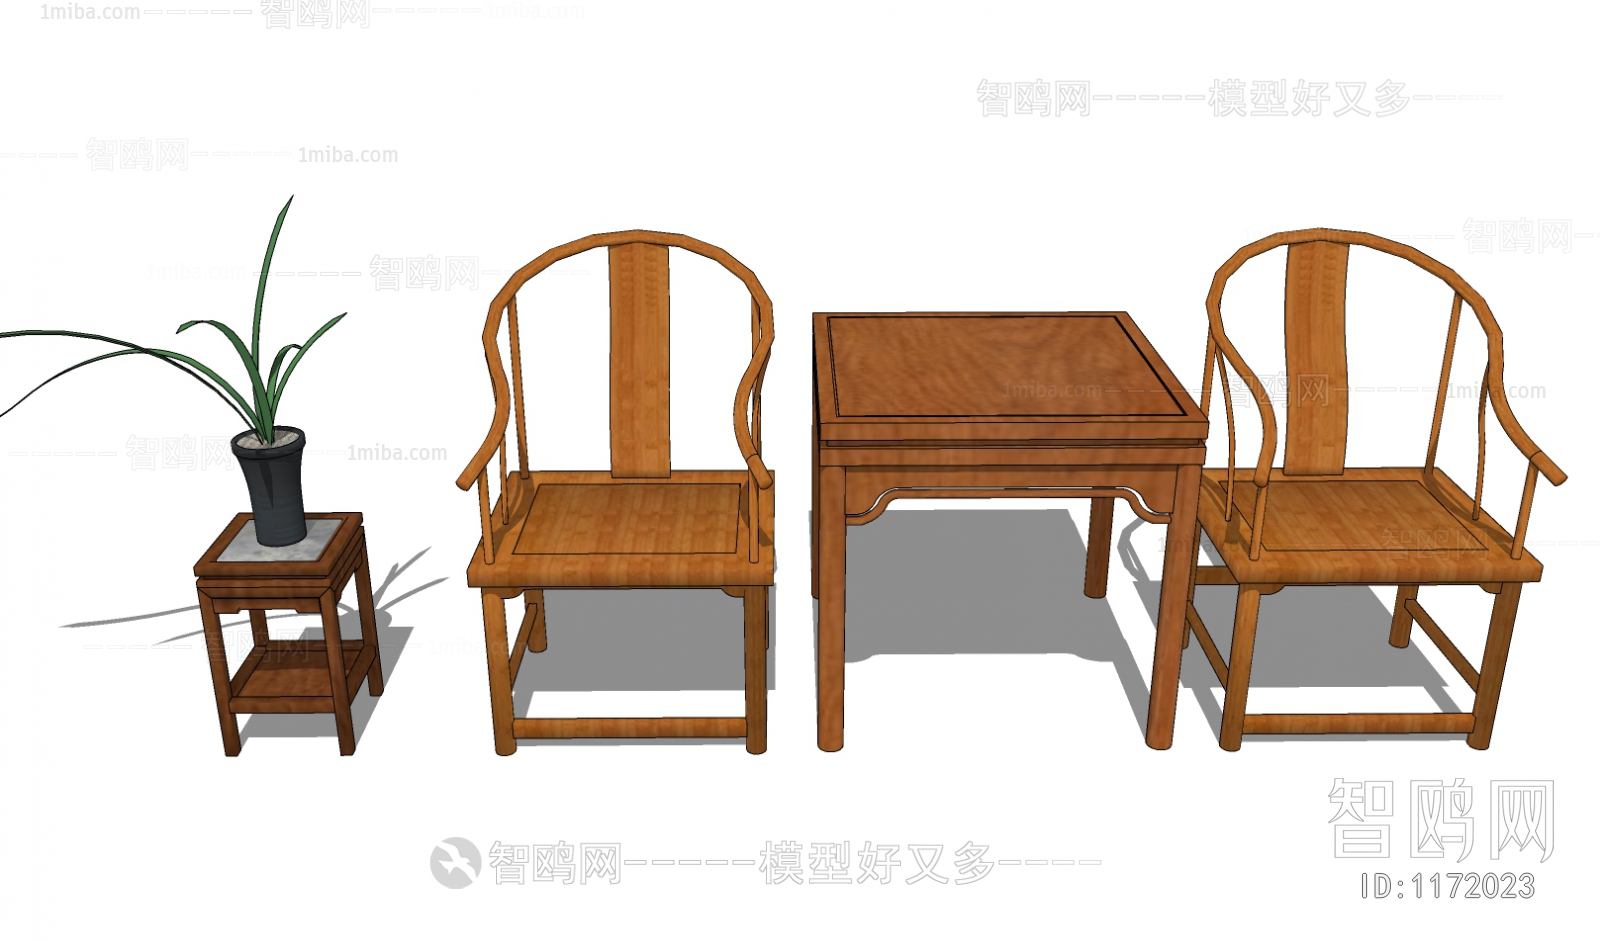 New Chinese Style Leisure Table And Chair